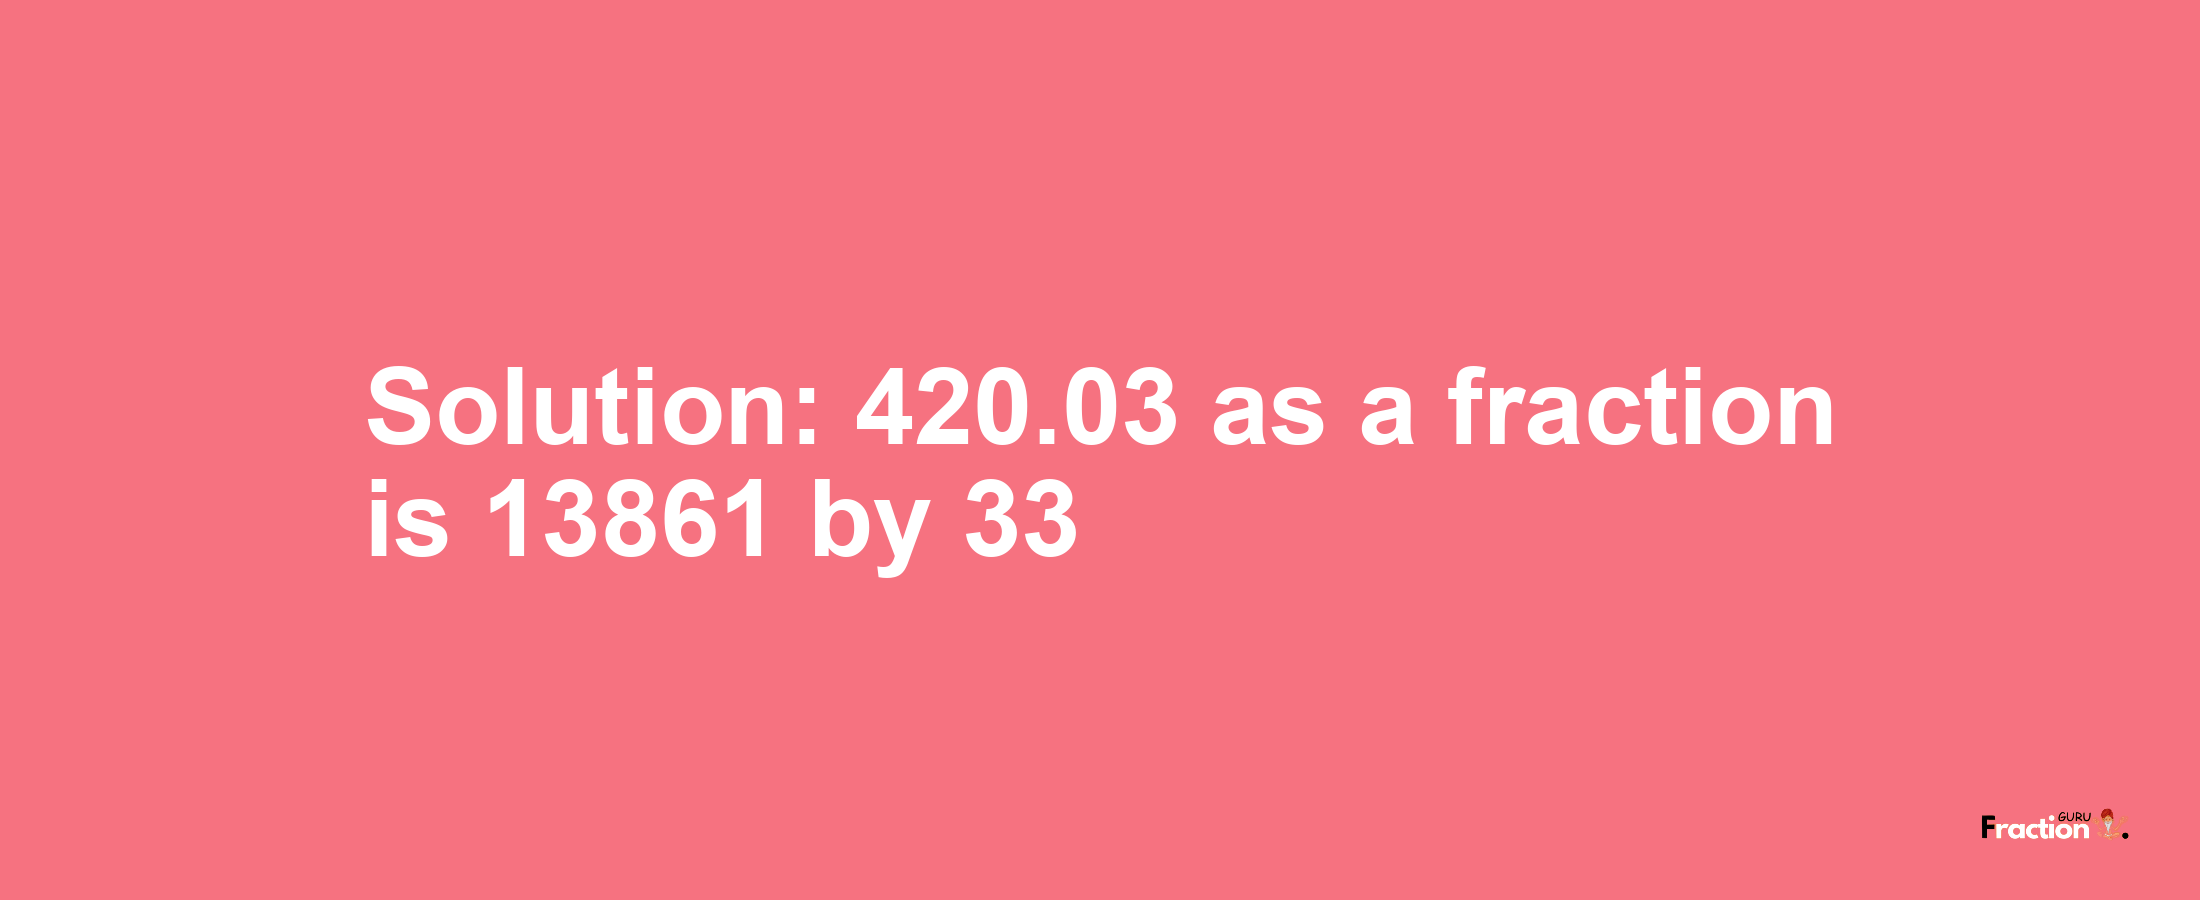 Solution:420.03 as a fraction is 13861/33